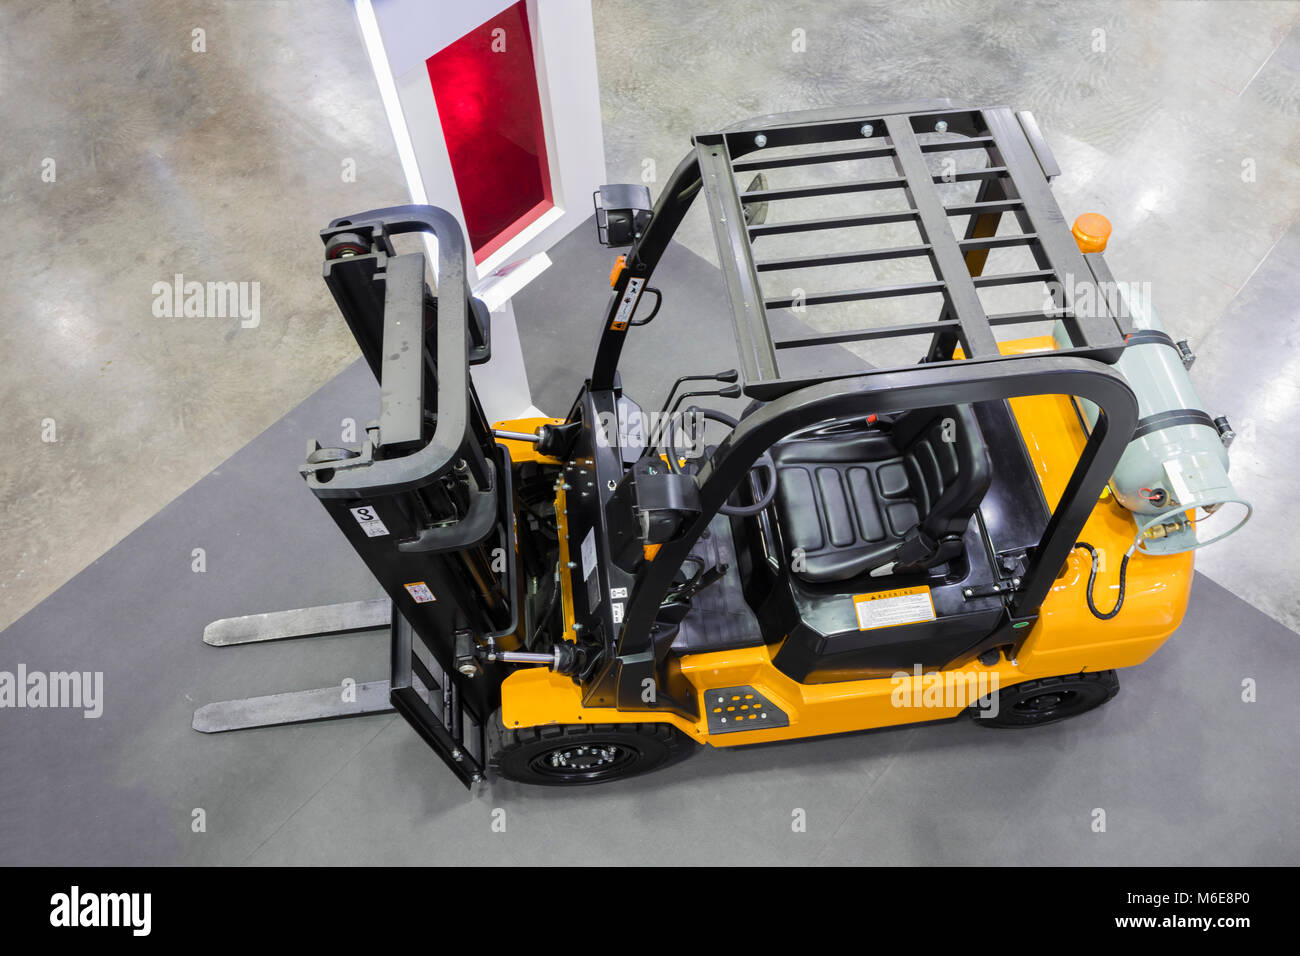 The Industrial Forklift truck ; Seen by Top View Stock Photo - Alamy